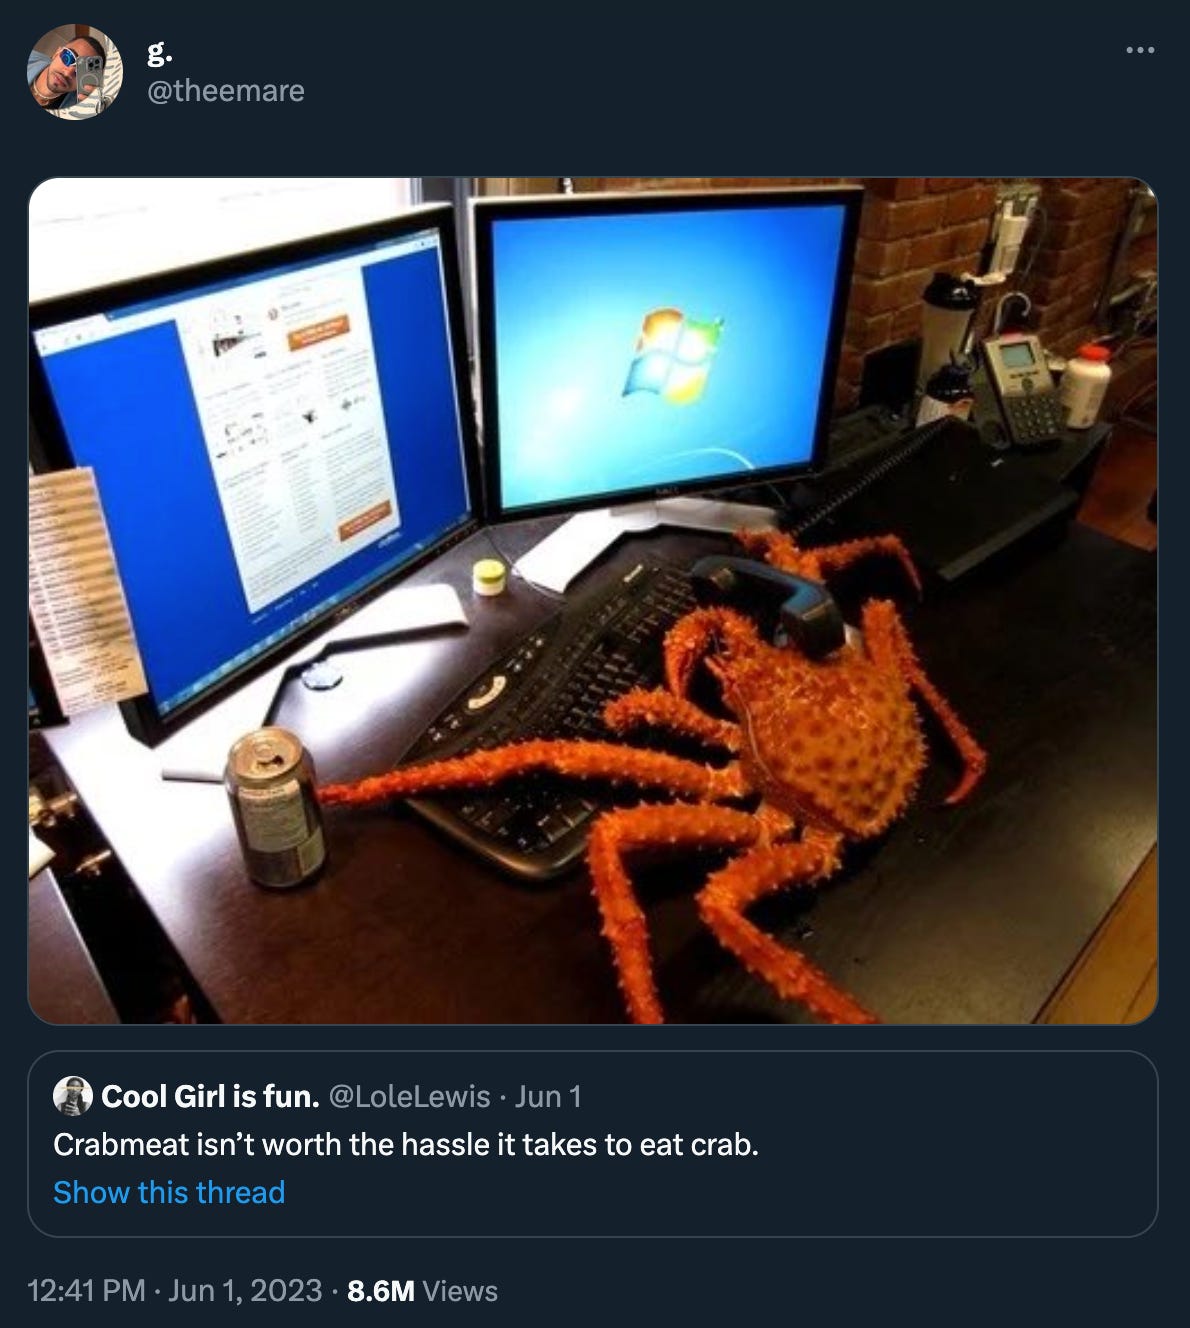 Tweet by theemare: Picture of a crab at a desk in front of two monitors, quoting another tweet that reads: “Crabmeat isn’t worth the hassle it takes to eat crab.”